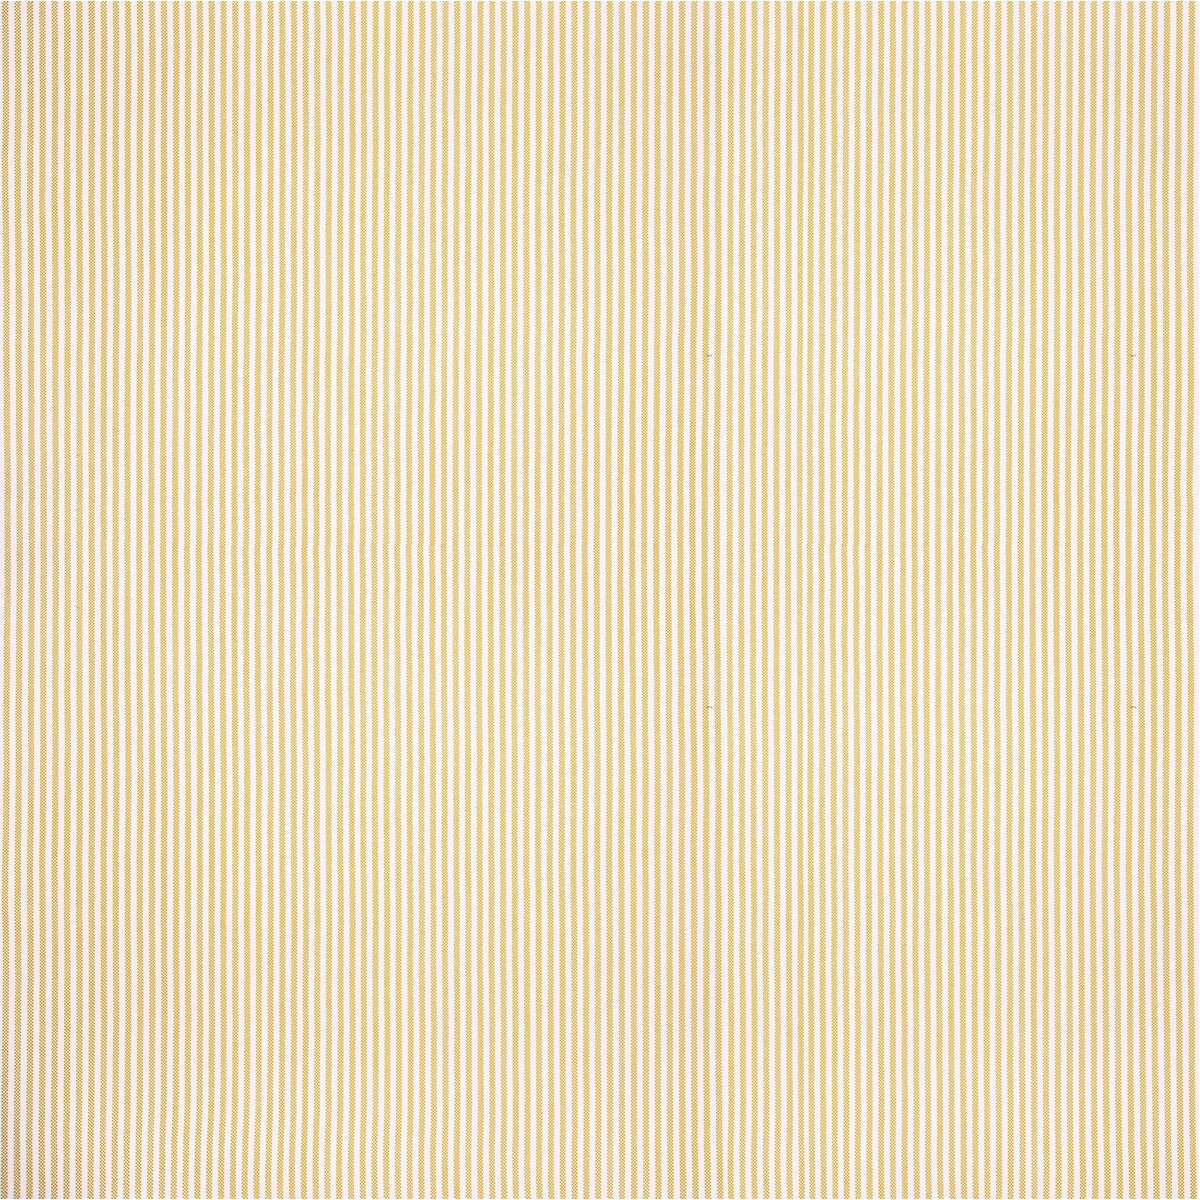 Laurence fabric in amarillo color - pattern GDT5386.6.0 - by Gaston y Daniela in the Gaston Africalia collection